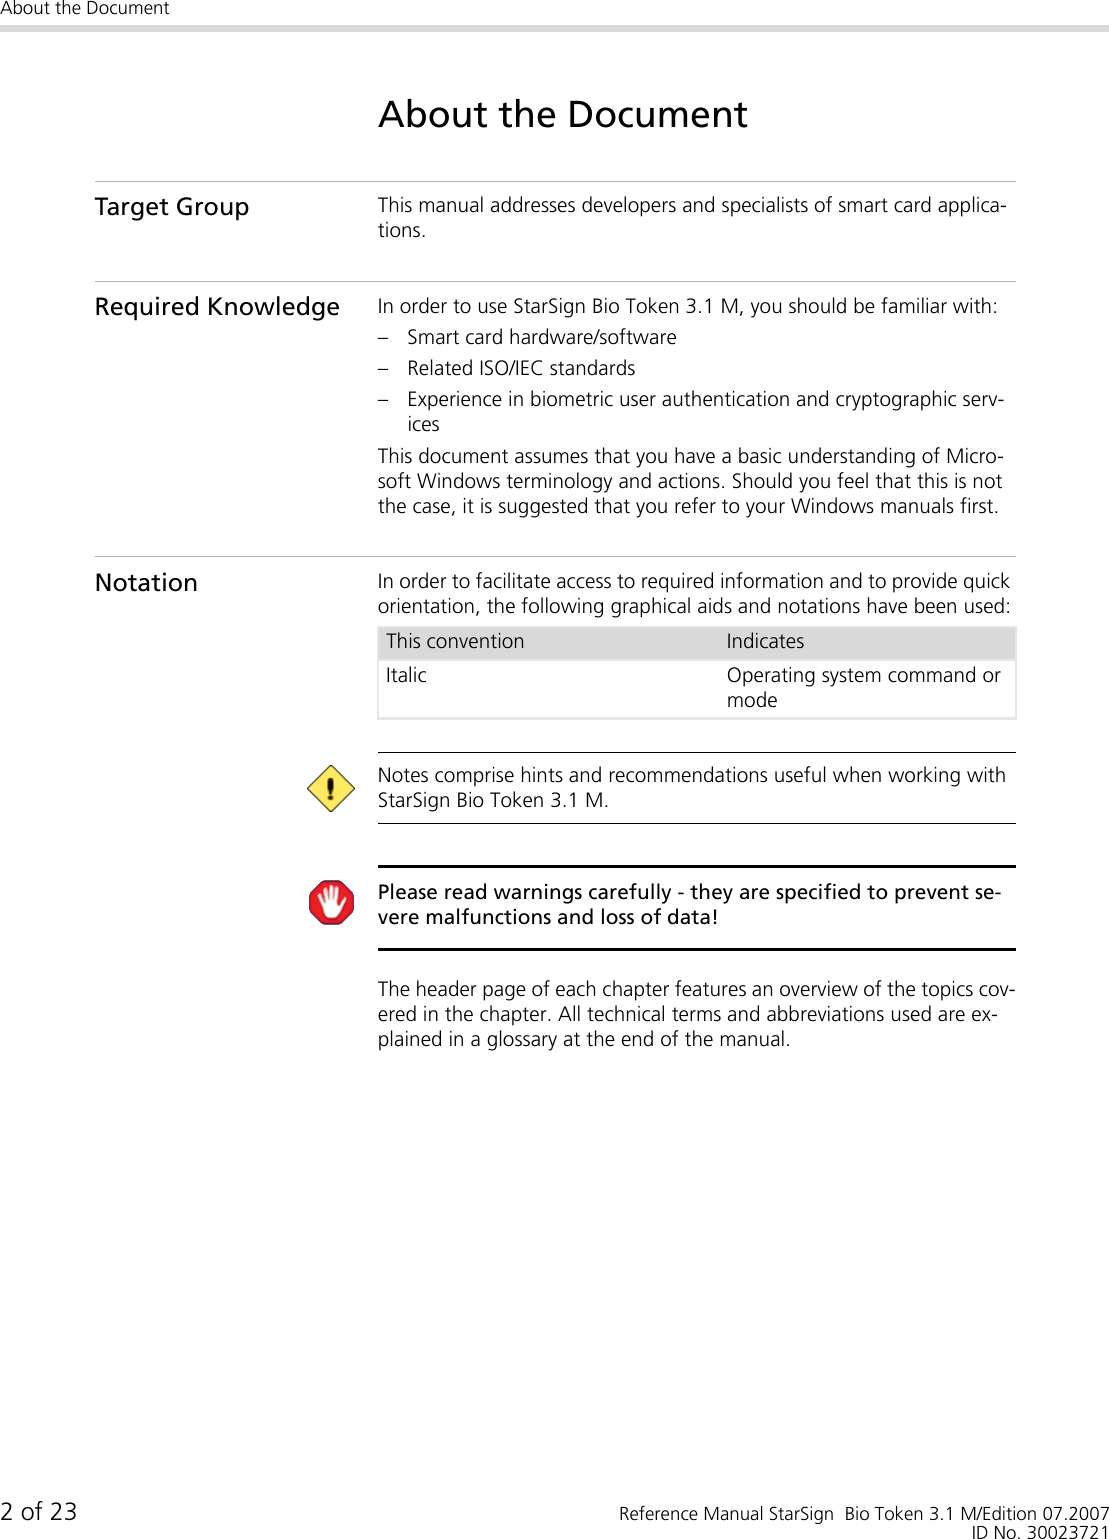 About the Document2 of 23 Reference Manual StarSign  Bio Token 3.1 M/Edition 07.2007ID No. 30023721About the DocumentTarget Group This manual addresses developers and specialists of smart card applica-tions.Required Knowledge In order to use StarSign Bio Token 3.1 M, you should be familiar with:– Smart card hardware/software– Related ISO/IEC standards– Experience in biometric user authentication and cryptographic serv-icesThis document assumes that you have a basic understanding of Micro-soft Windows terminology and actions. Should you feel that this is not the case, it is suggested that you refer to your Windows manuals first.Notation In order to facilitate access to required information and to provide quick orientation, the following graphical aids and notations have been used: Notes comprise hints and recommendations useful when working with StarSign Bio Token 3.1 M. Please read warnings carefully - they are specified to prevent se-vere malfunctions and loss of data!The header page of each chapter features an overview of the topics cov-ered in the chapter. All technical terms and abbreviations used are ex-plained in a glossary at the end of the manual.This convention IndicatesItalic Operating system command or mode